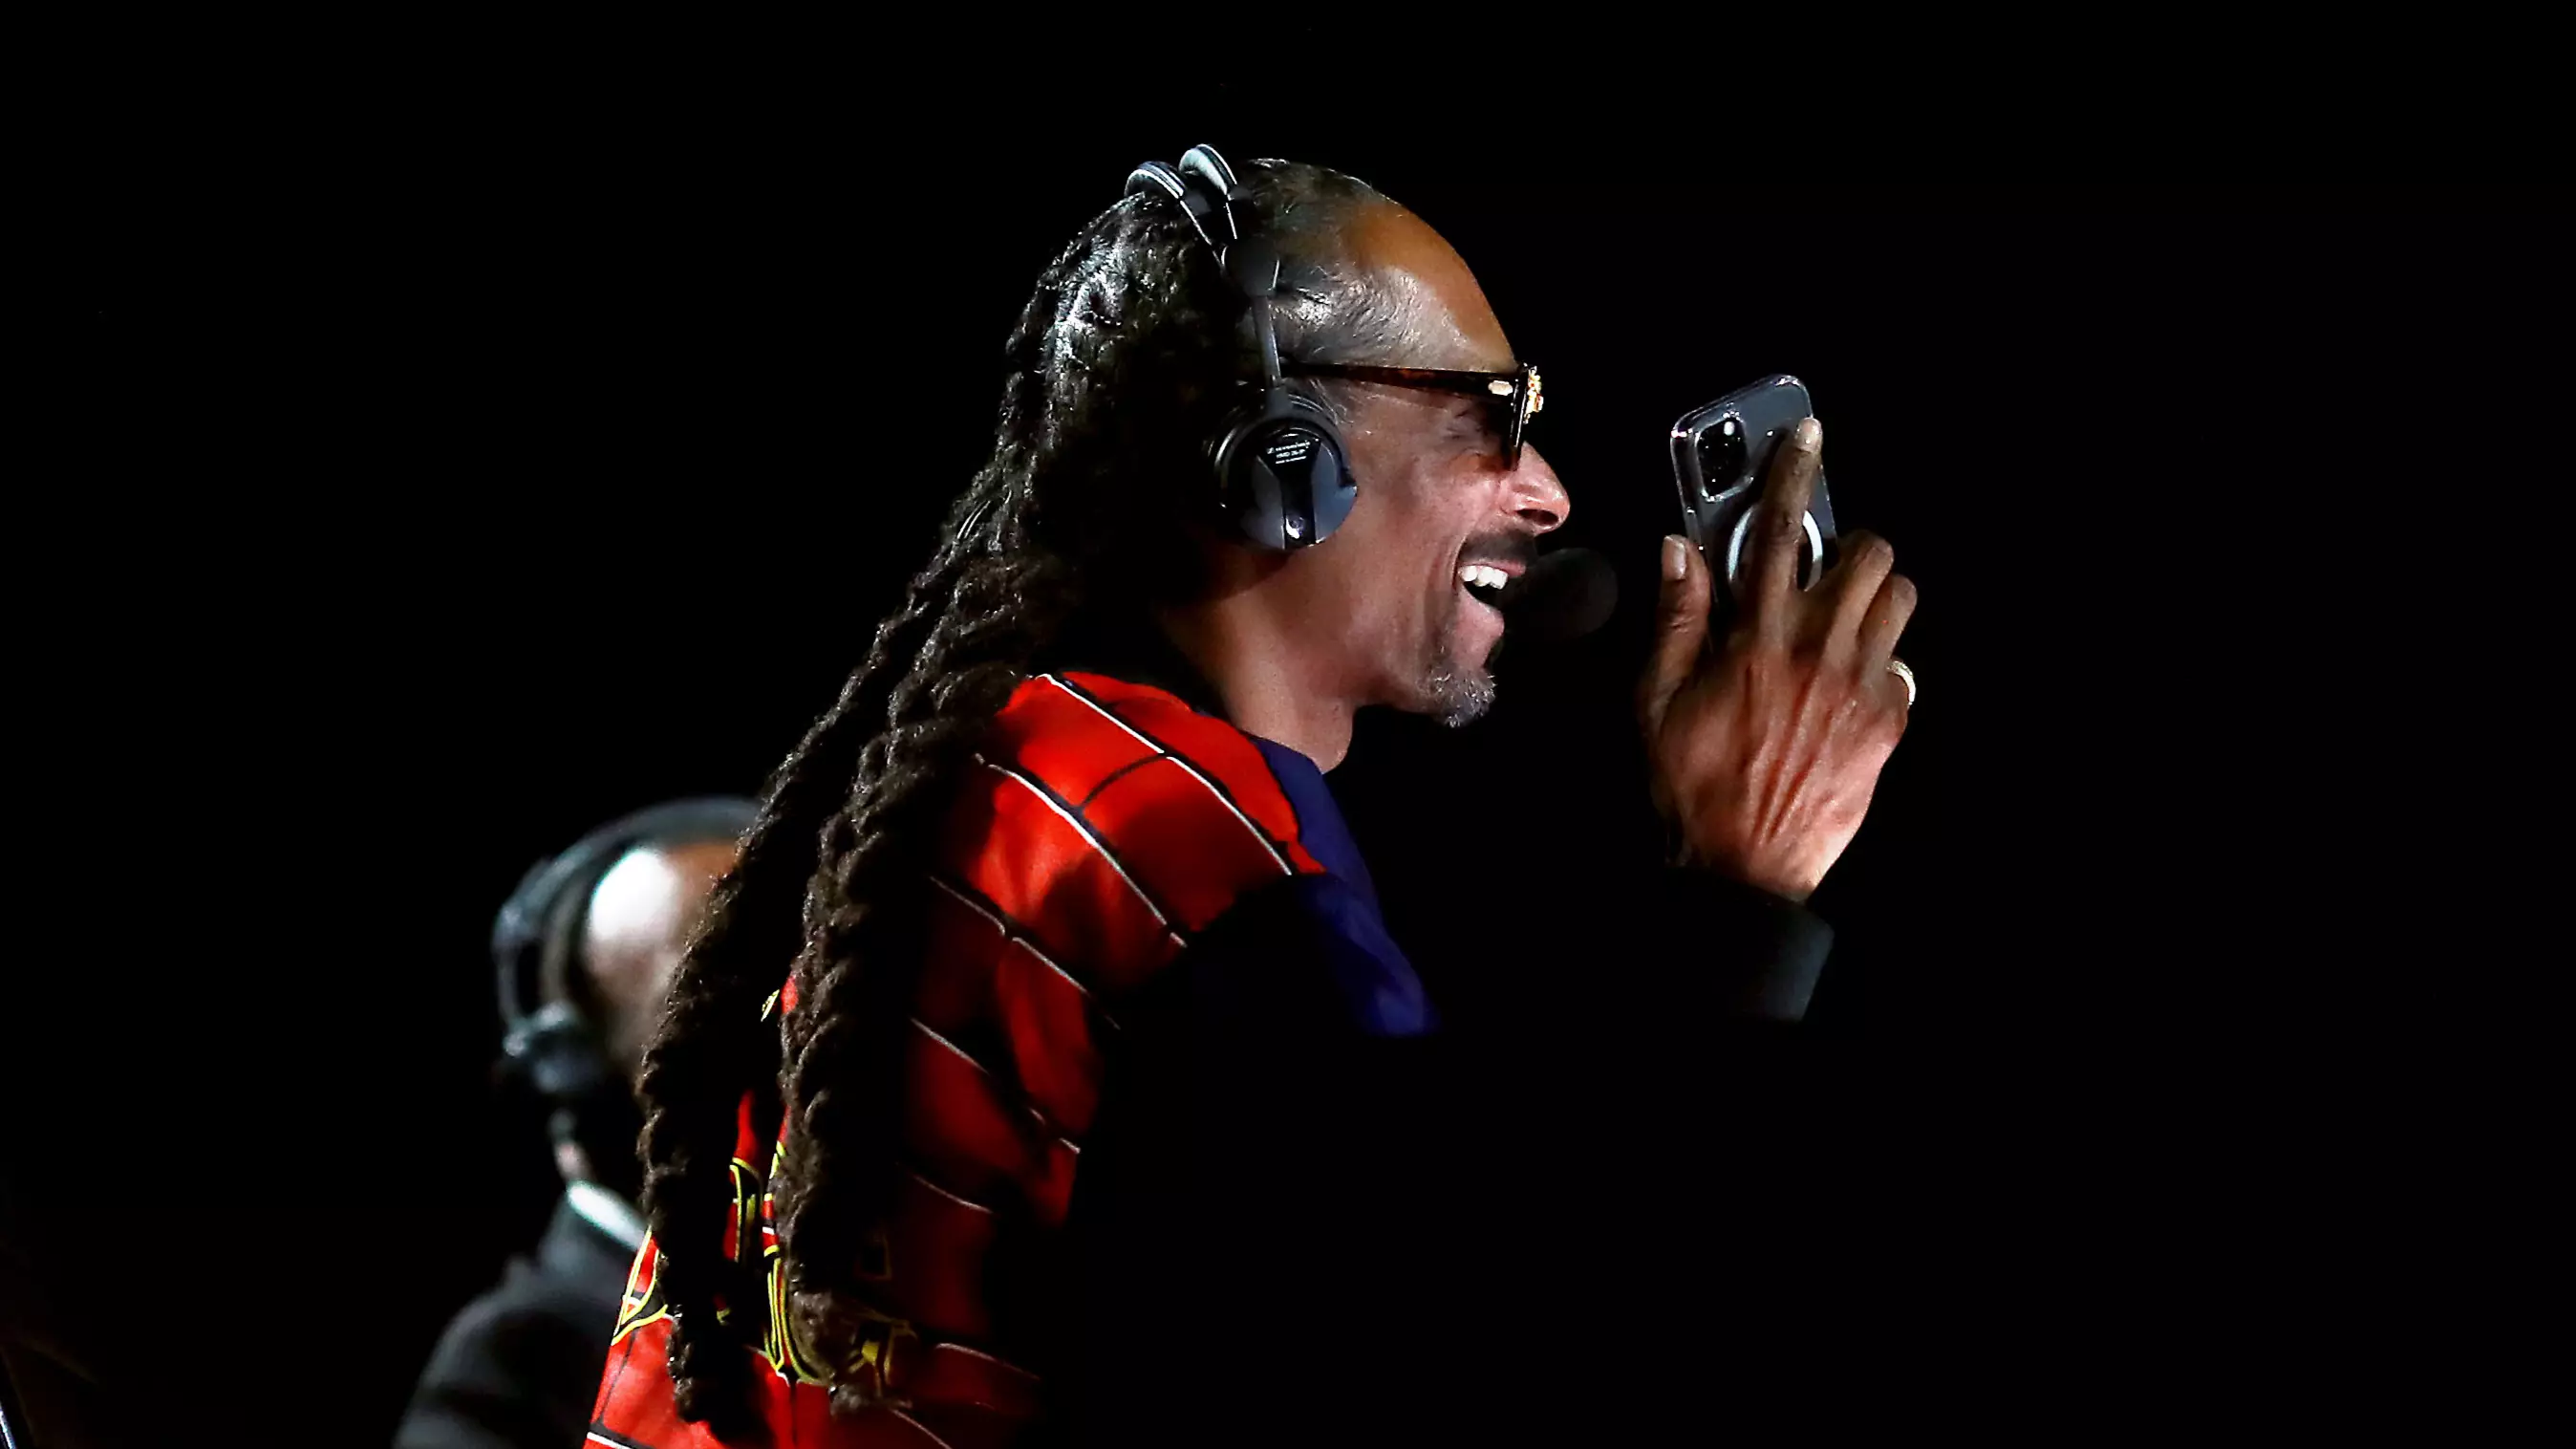 There was even calls for Snoop Dogg to commentate the bout.